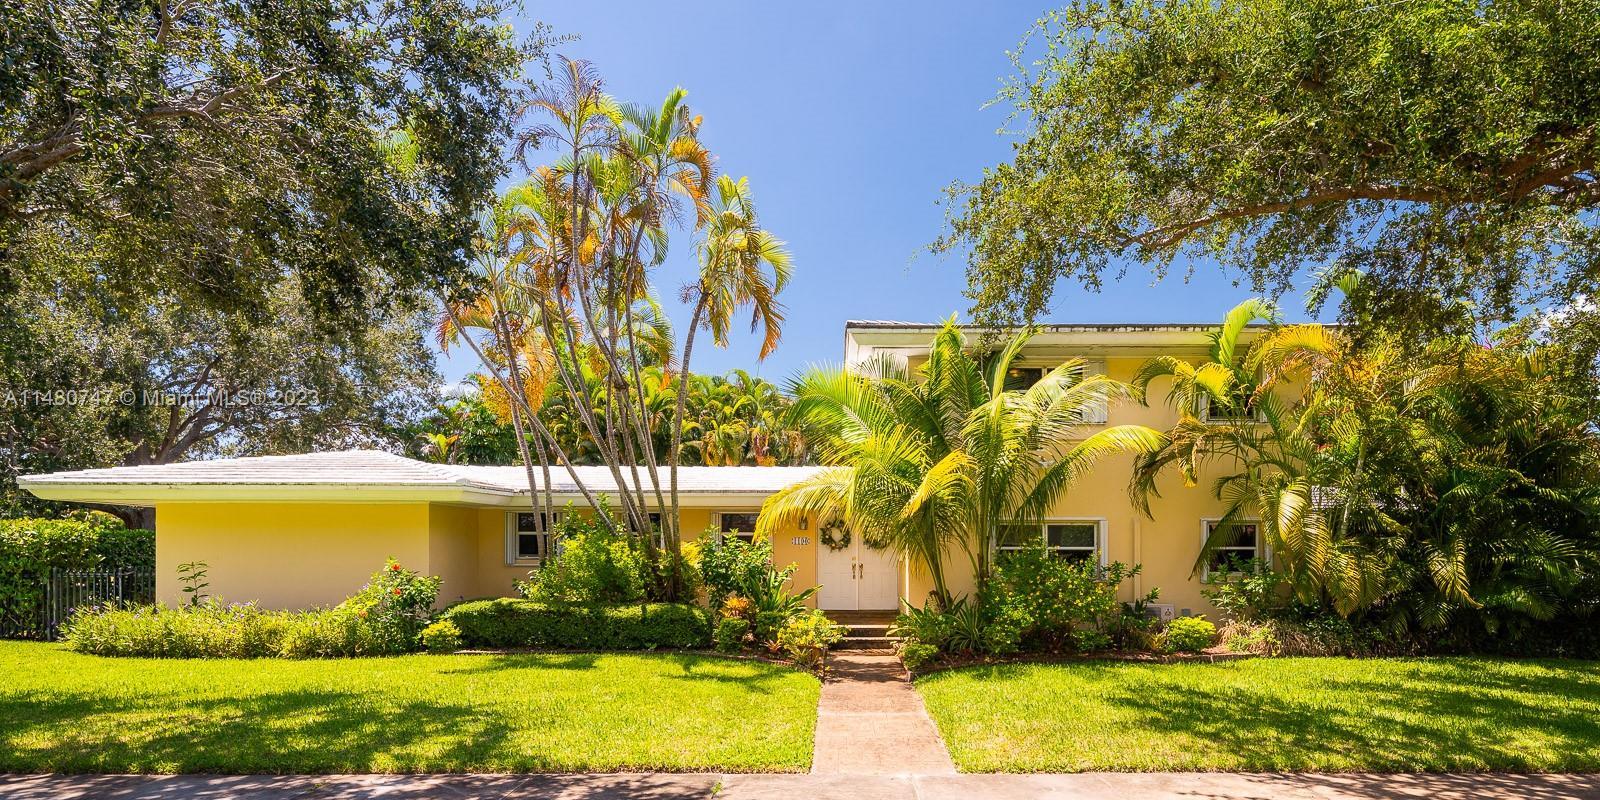 Fall in love with this standout home in coveted east Miami Shores, a short walk to the famed Miami S